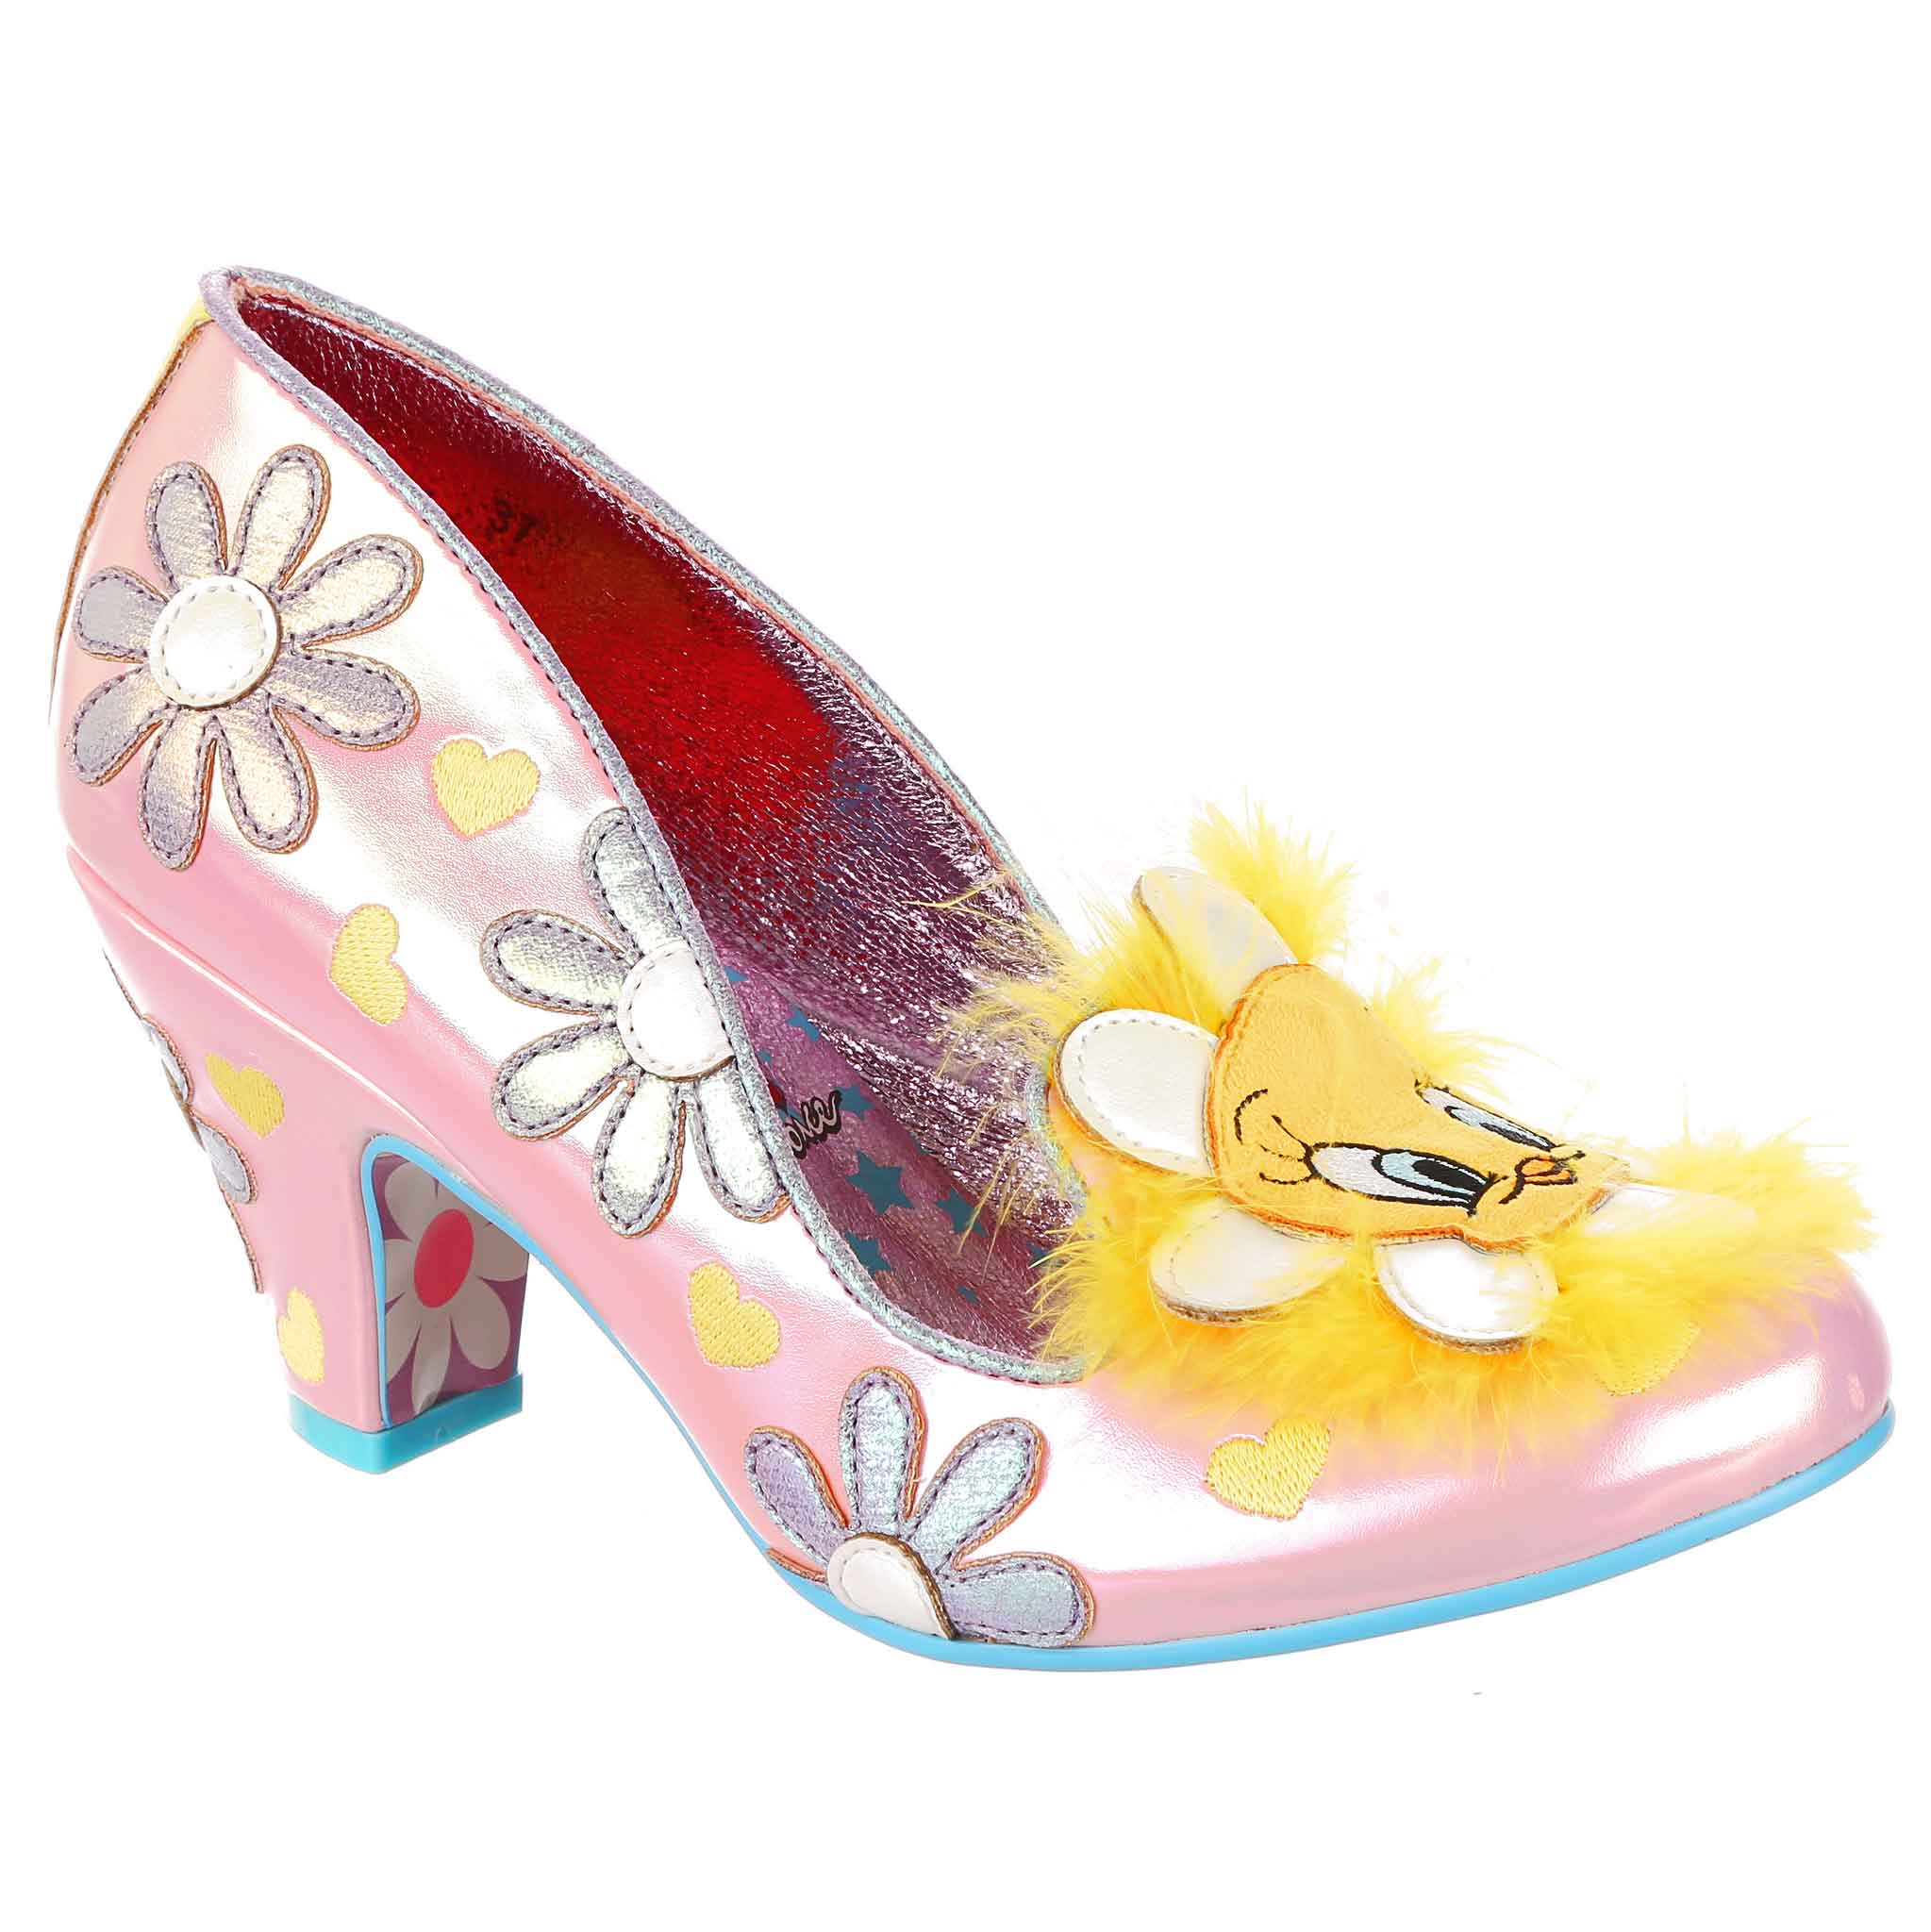 Pink iridescent mid heel shoes with purple shiny flowers and yellow embroidered hearts make a statement with a large flower with Tweety Bird's face in the centre and yellow feathers behind.